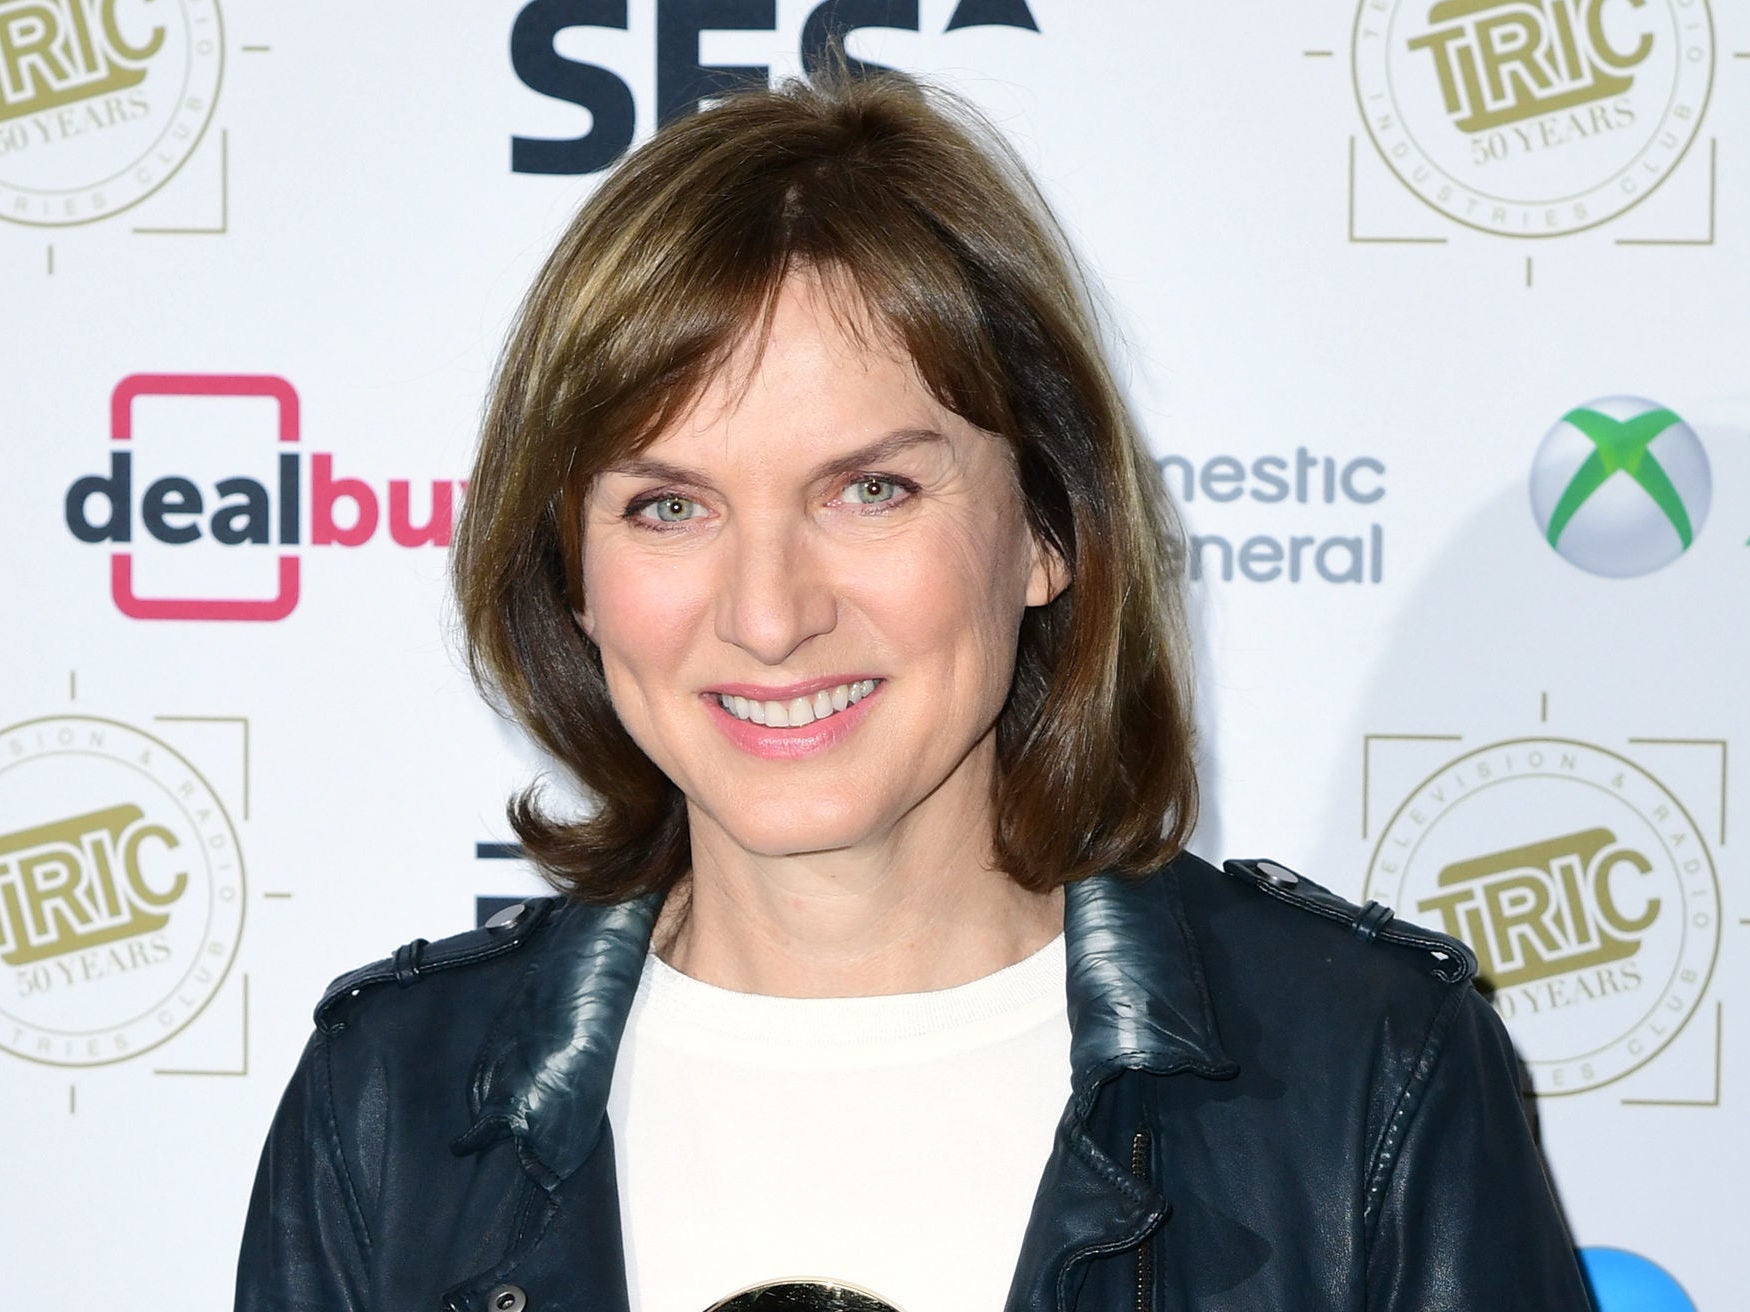 Fiona Bruce reveals her hands were 'trembling' ahead of BBC Question Time debut due to nerves